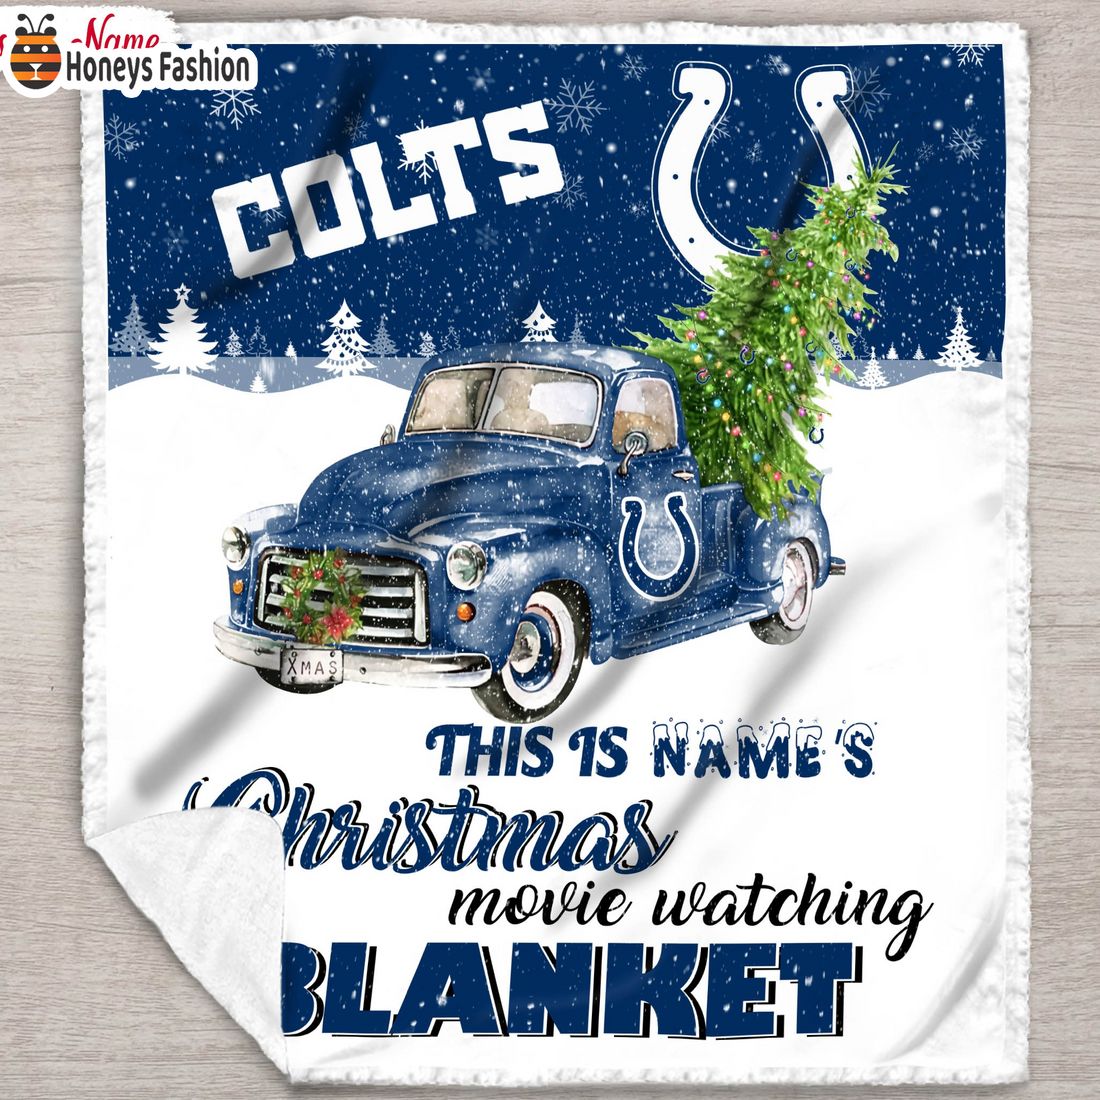 NFL Indianapolis Colts Custom Name Christmas movie watching quilt blanket